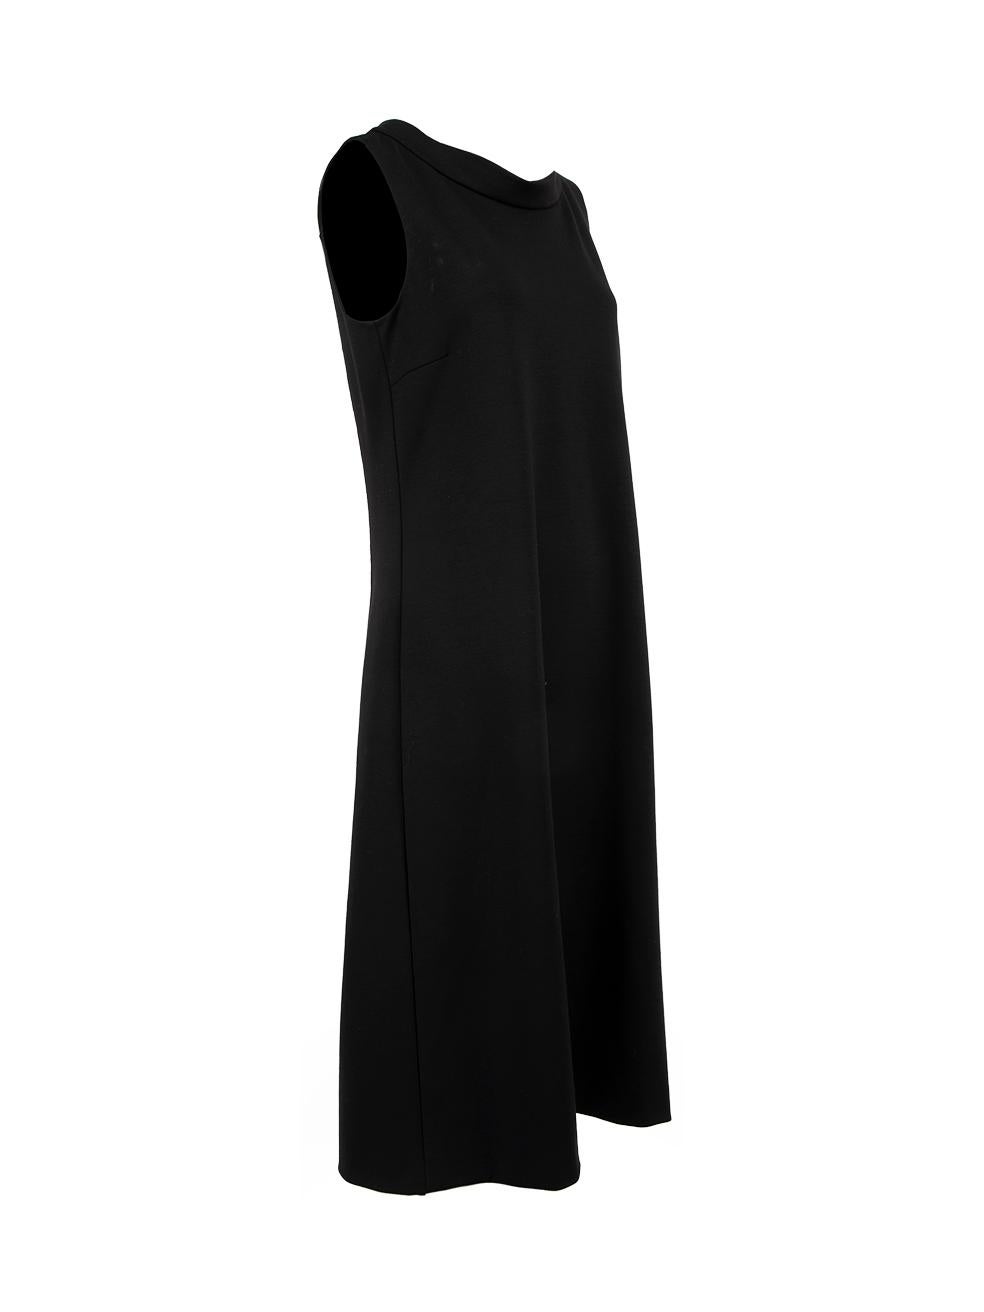 CONDITION is Very good. Hardly any visible wear to dress is evident on this used Yves Saint Laurent designer resale item. 
 
 Details
 Autumn 2010
 Black
 Wool
 Shift dress
 Midi length
 Sleeveless
 Boat neckline
 Back zip fastening
 
 
 Made in